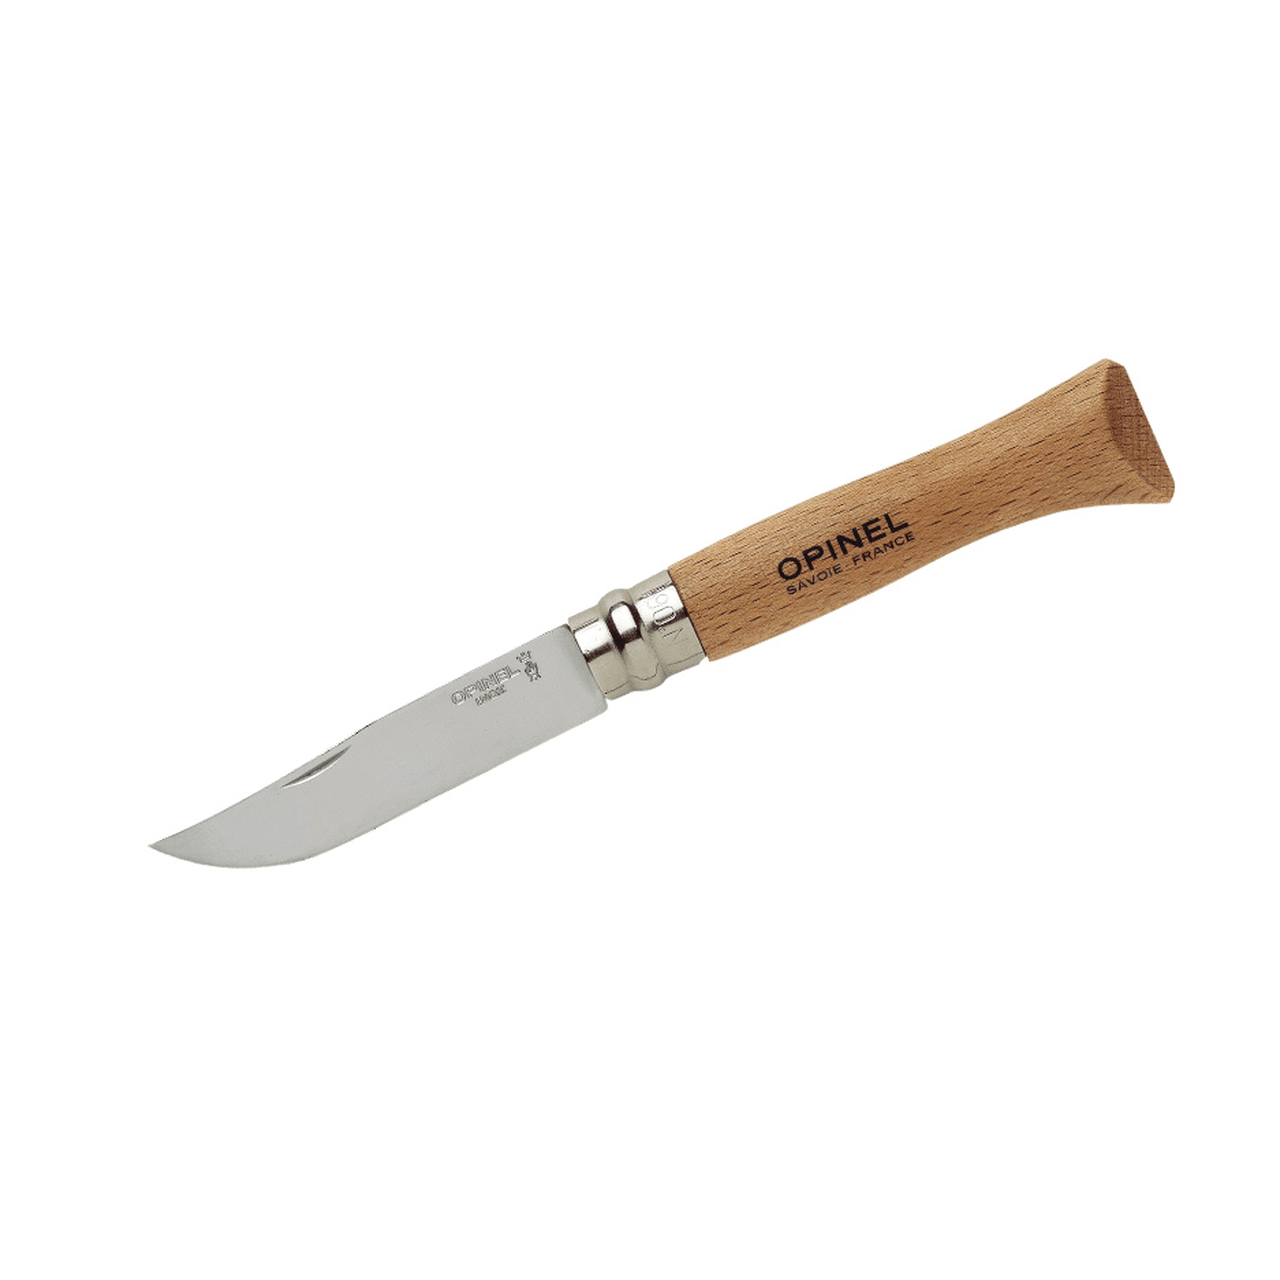 Opinel, Opinel No.6 Classic Originals Stainless Steel Knife, Folding Knives, Wylies Outdoor World,